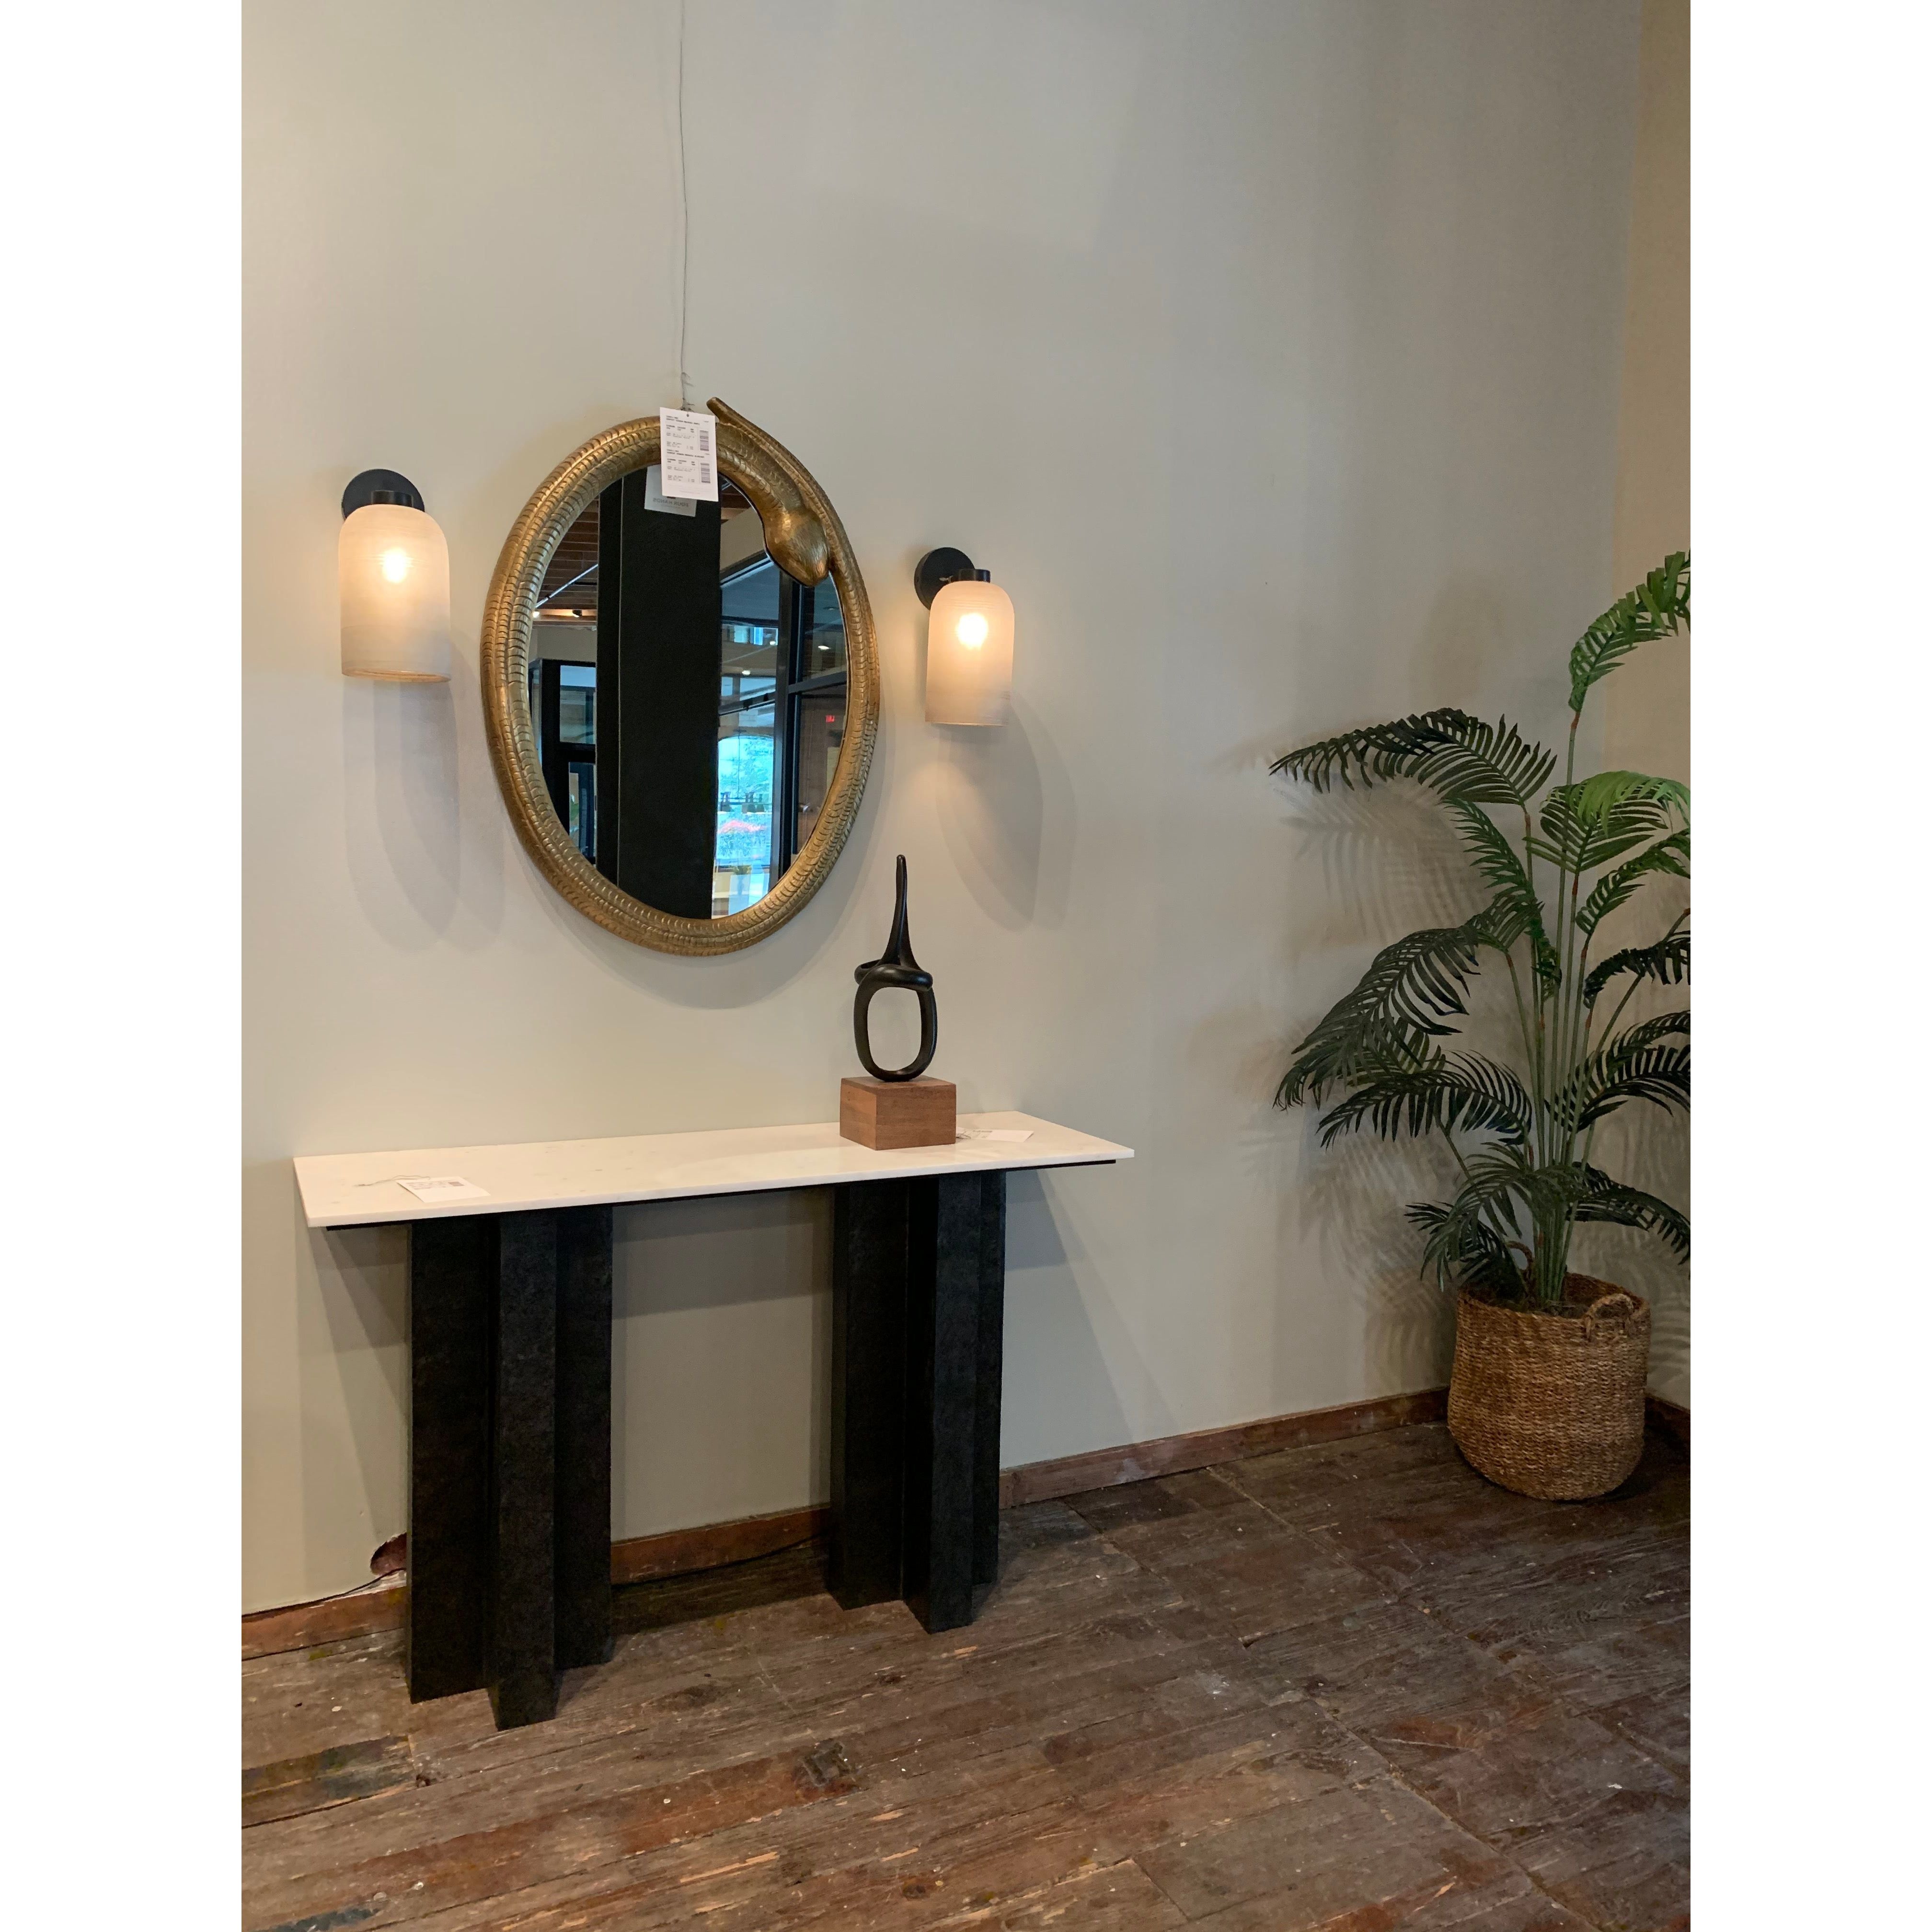 Finished in a raw black, uniquely angular cast aluminum legs, this Terrell Console Table - Raw Black showcases a rectangular tabletop of solid marble in a clean, polished white. We'd love to see this in an entryway or behind a sofa.   Overall Dimensions: 51.00"w x 17.00"d x 31.25"h